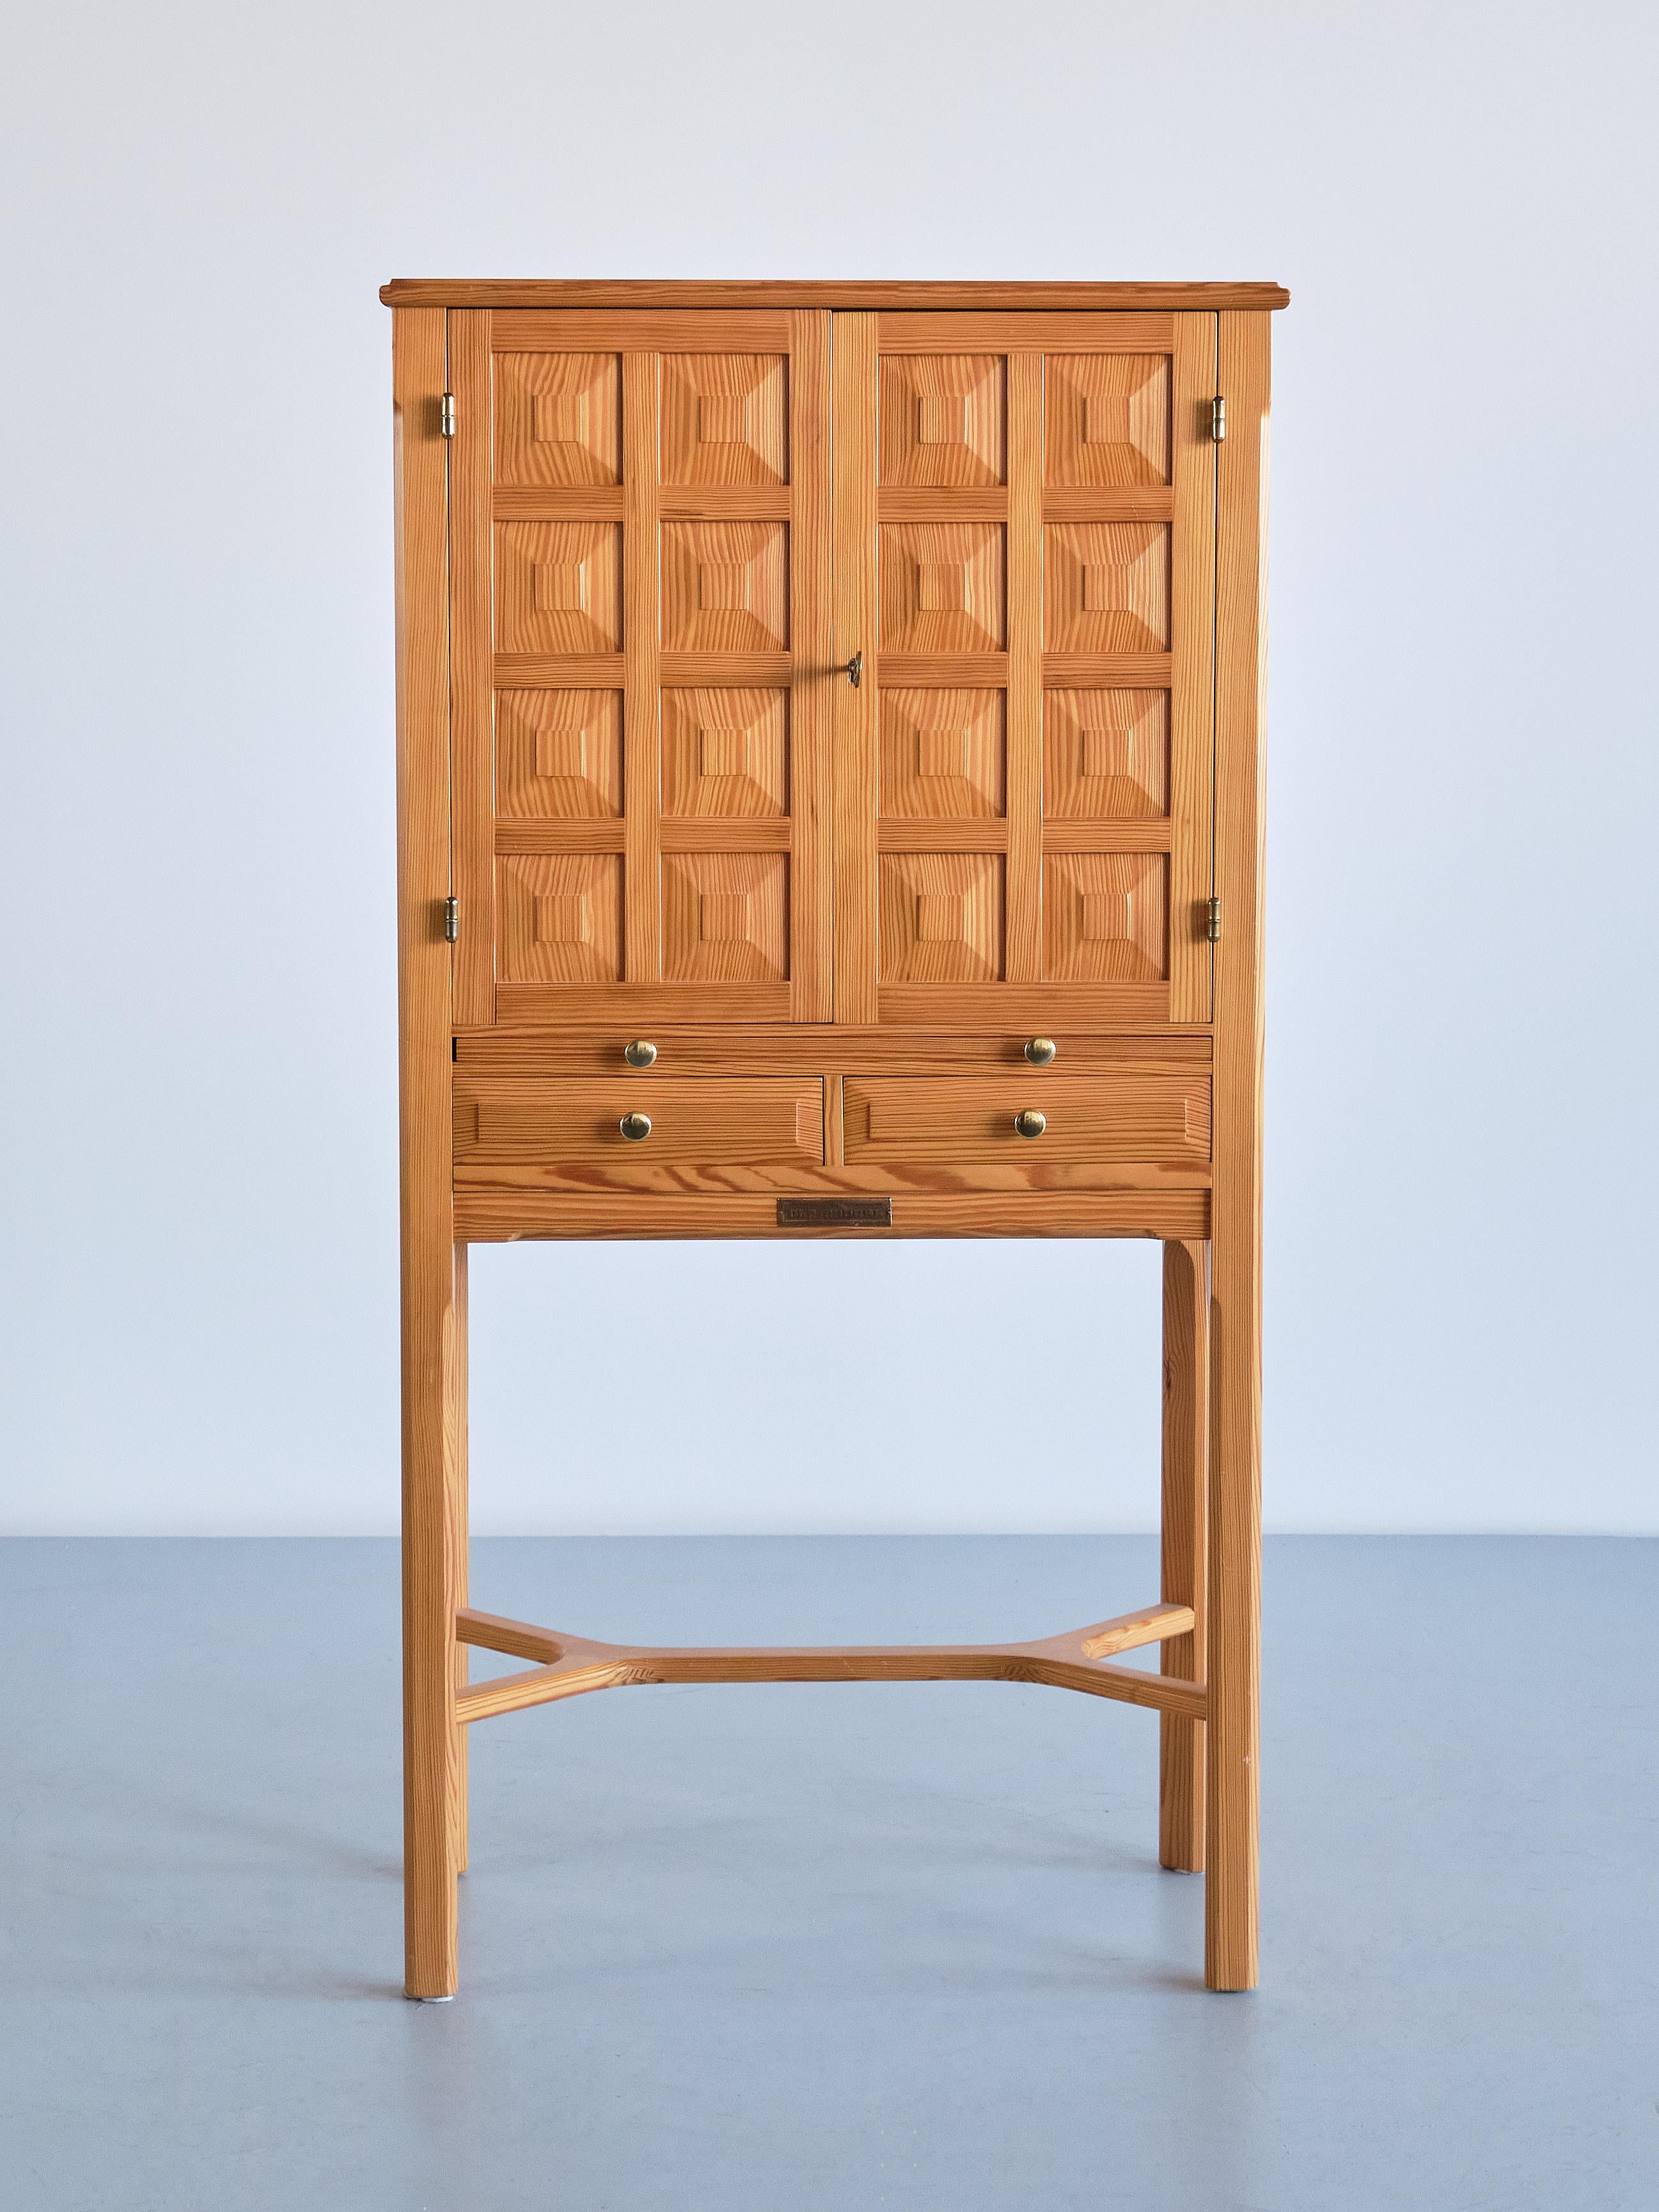 This striking cabinet was designed and produced by Ulf Ekdahl in Nybro, Sweden in 1979. 
The design is marked by the double doors, each panelled with eight squares with a centred, carved decoration. This creates a refined, geometric effect on the